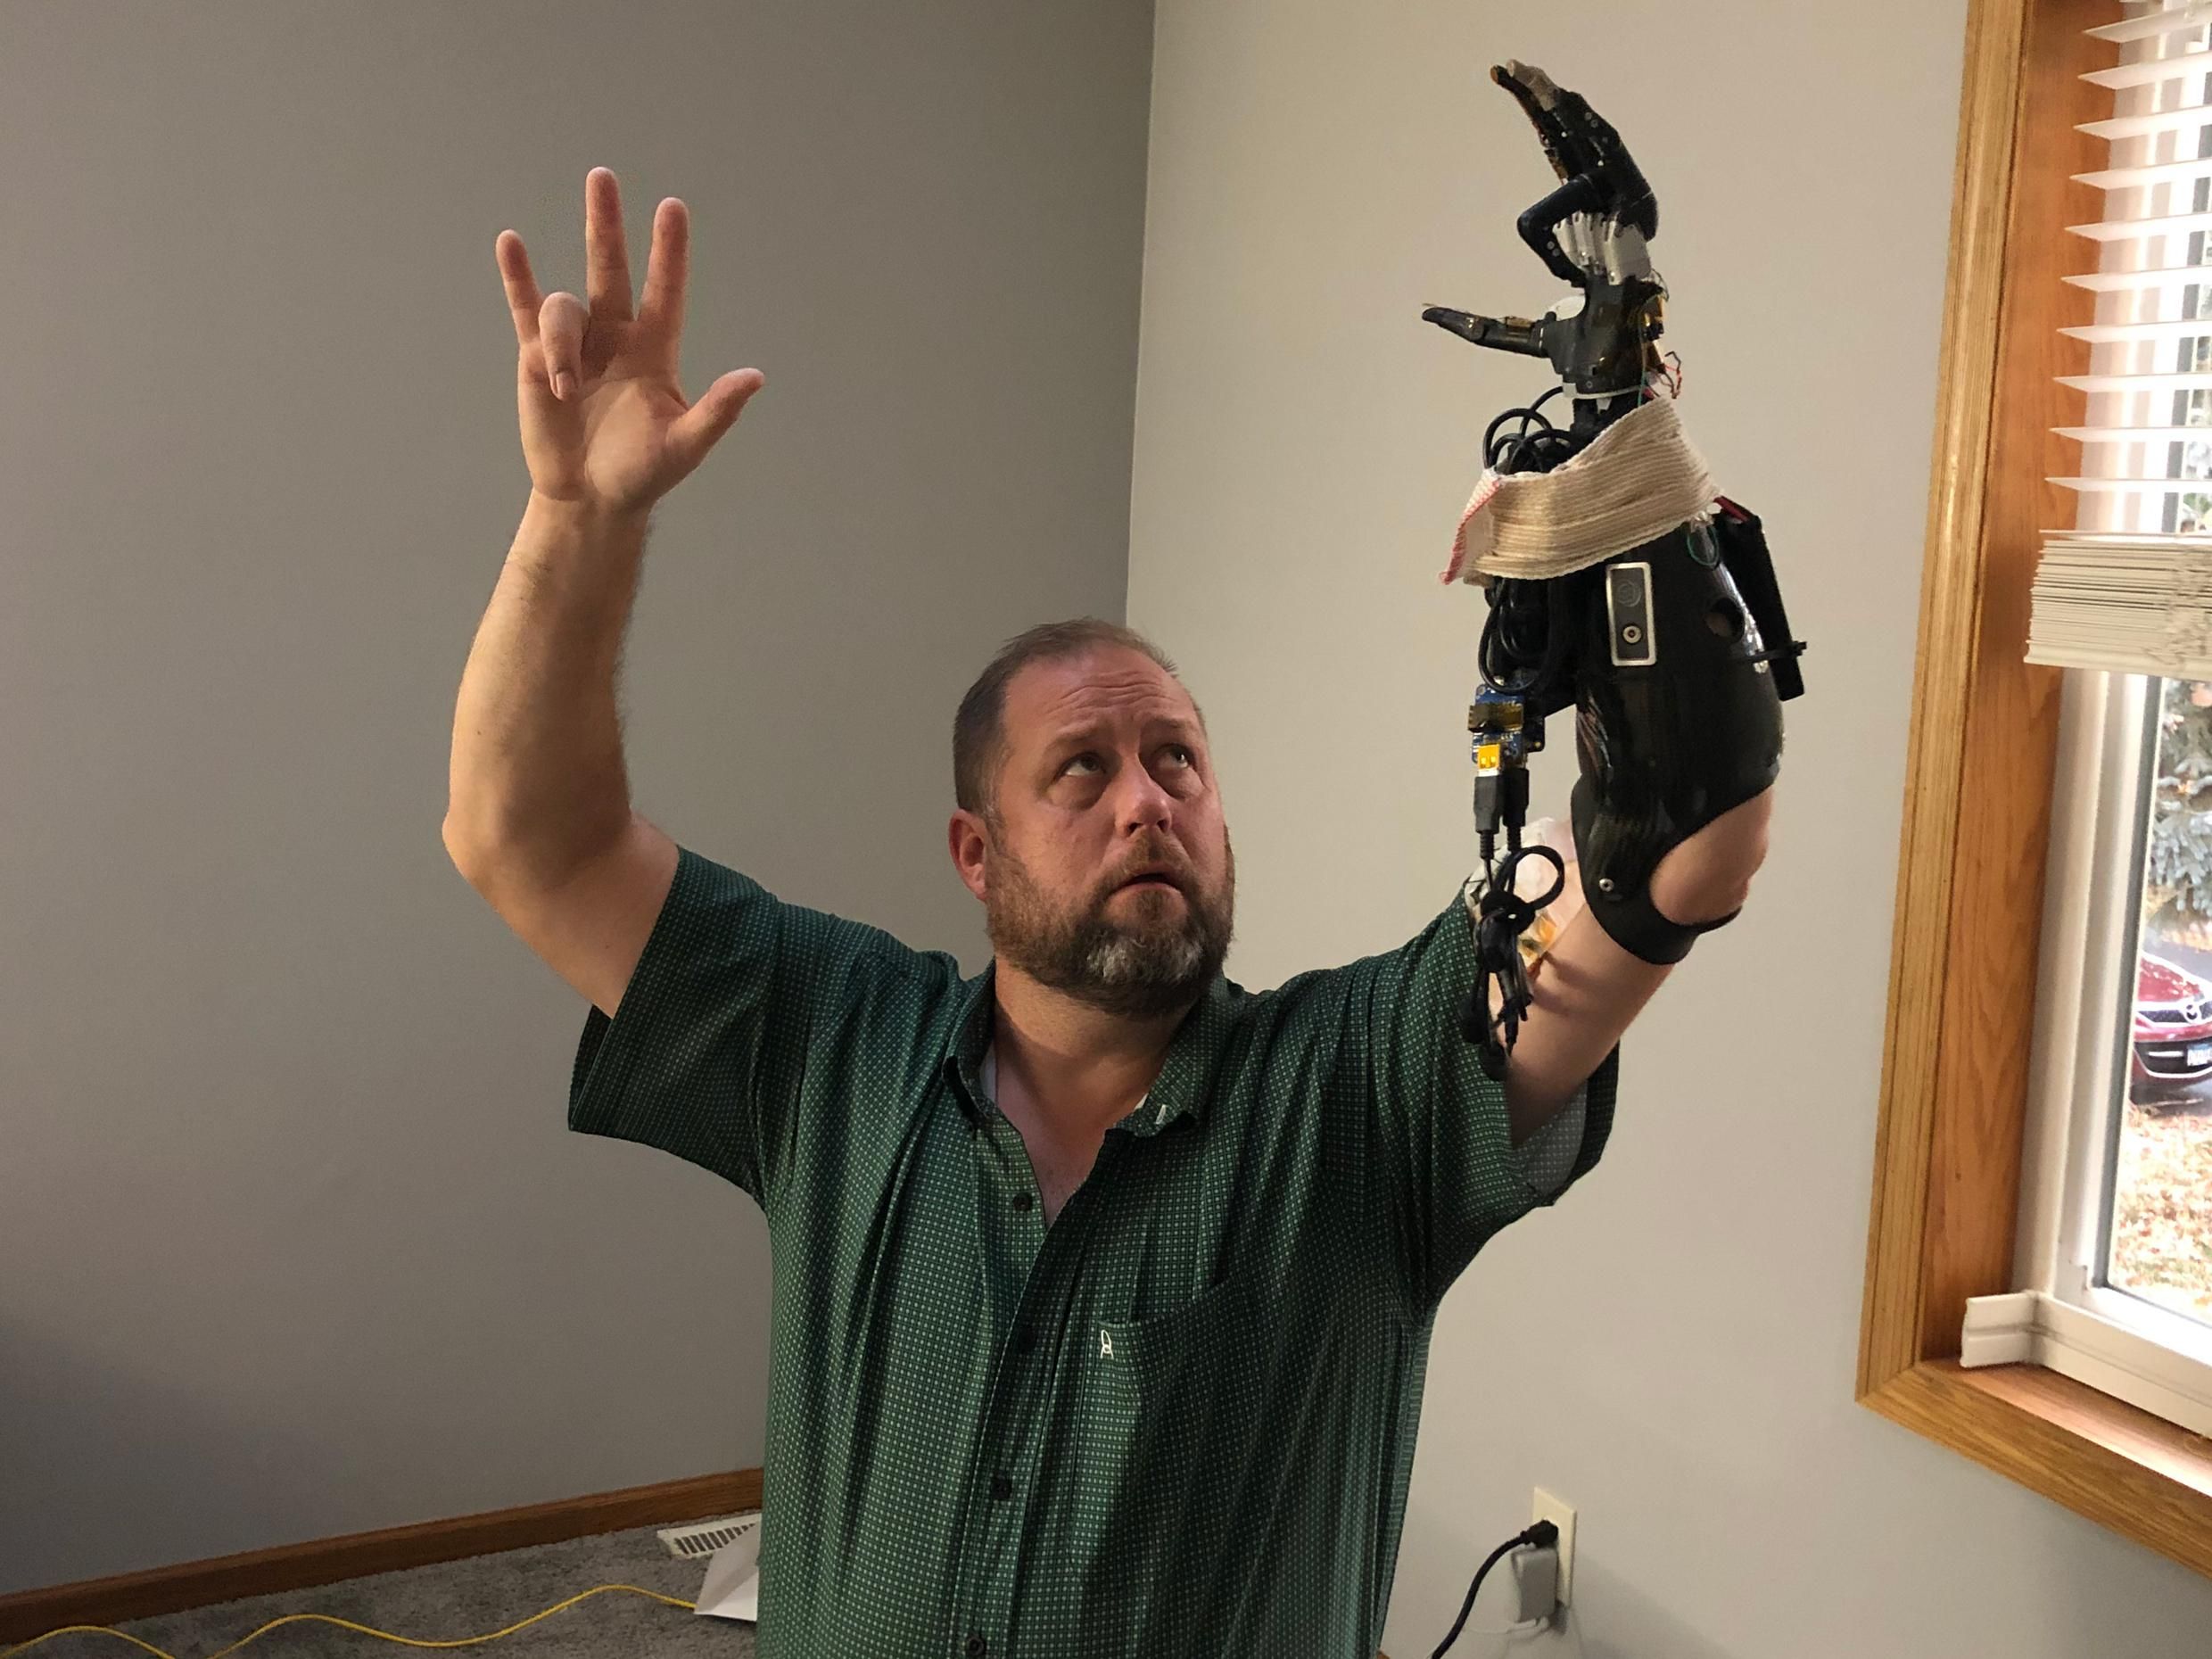 https://spectrum.ieee.org/media-library/less-than-p-greater-than-a-study-participant-controls-his-prosthetic-hand-with-a-new-peripheral-nerve-interface-whereby-he-simply-thinks-about-moving-individual-fingers-on-his-prosthetic-hand-and-it-does-the-corresponding-movement-less-than-p-greater-than.jpg?id=29640140